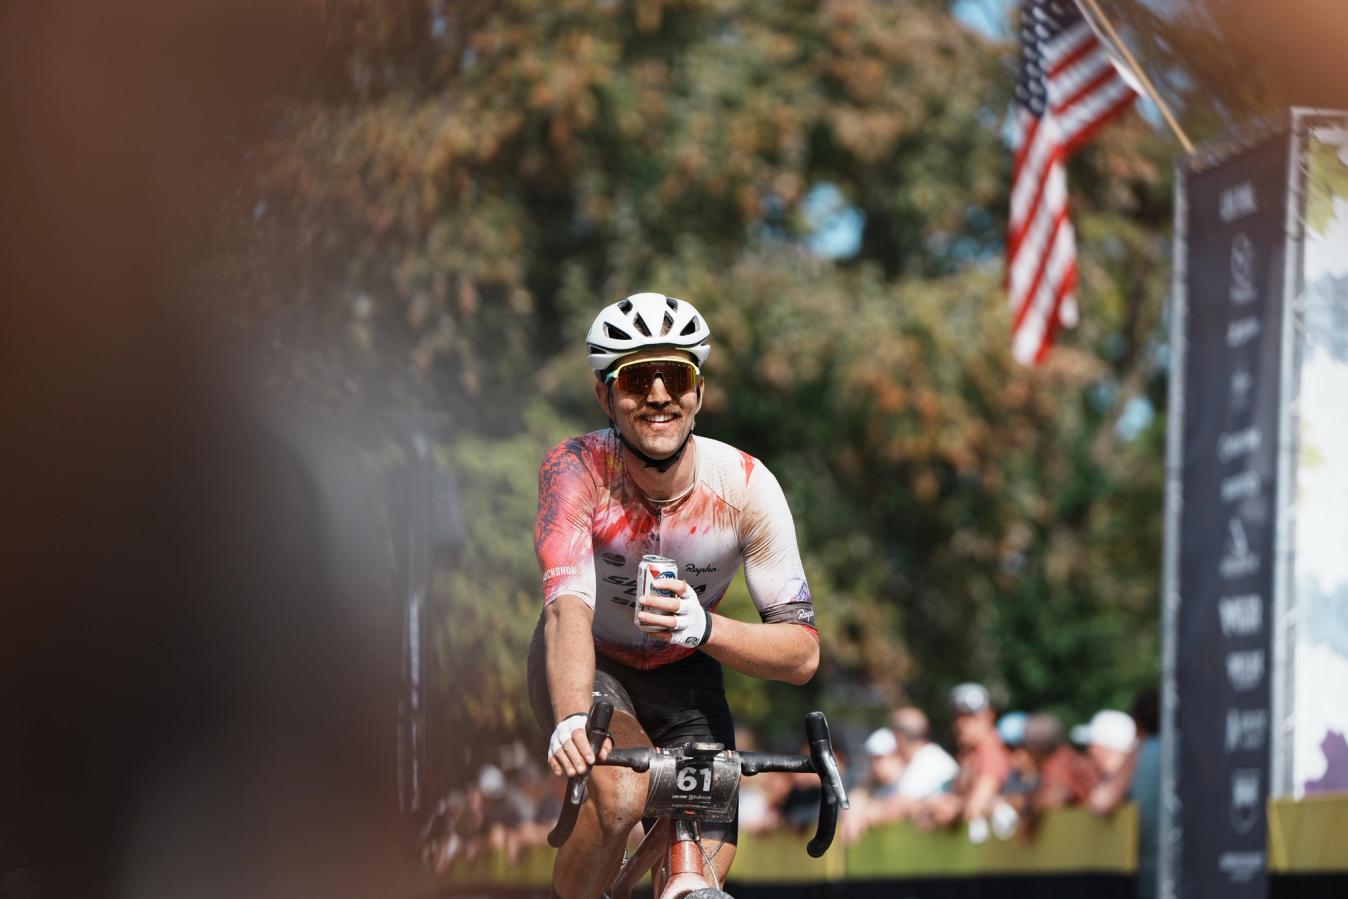 Tobin Ortenblad celebrating the end of the long Life Time Grand Prix season with a brew across the finish line of the Big Sugar Classic